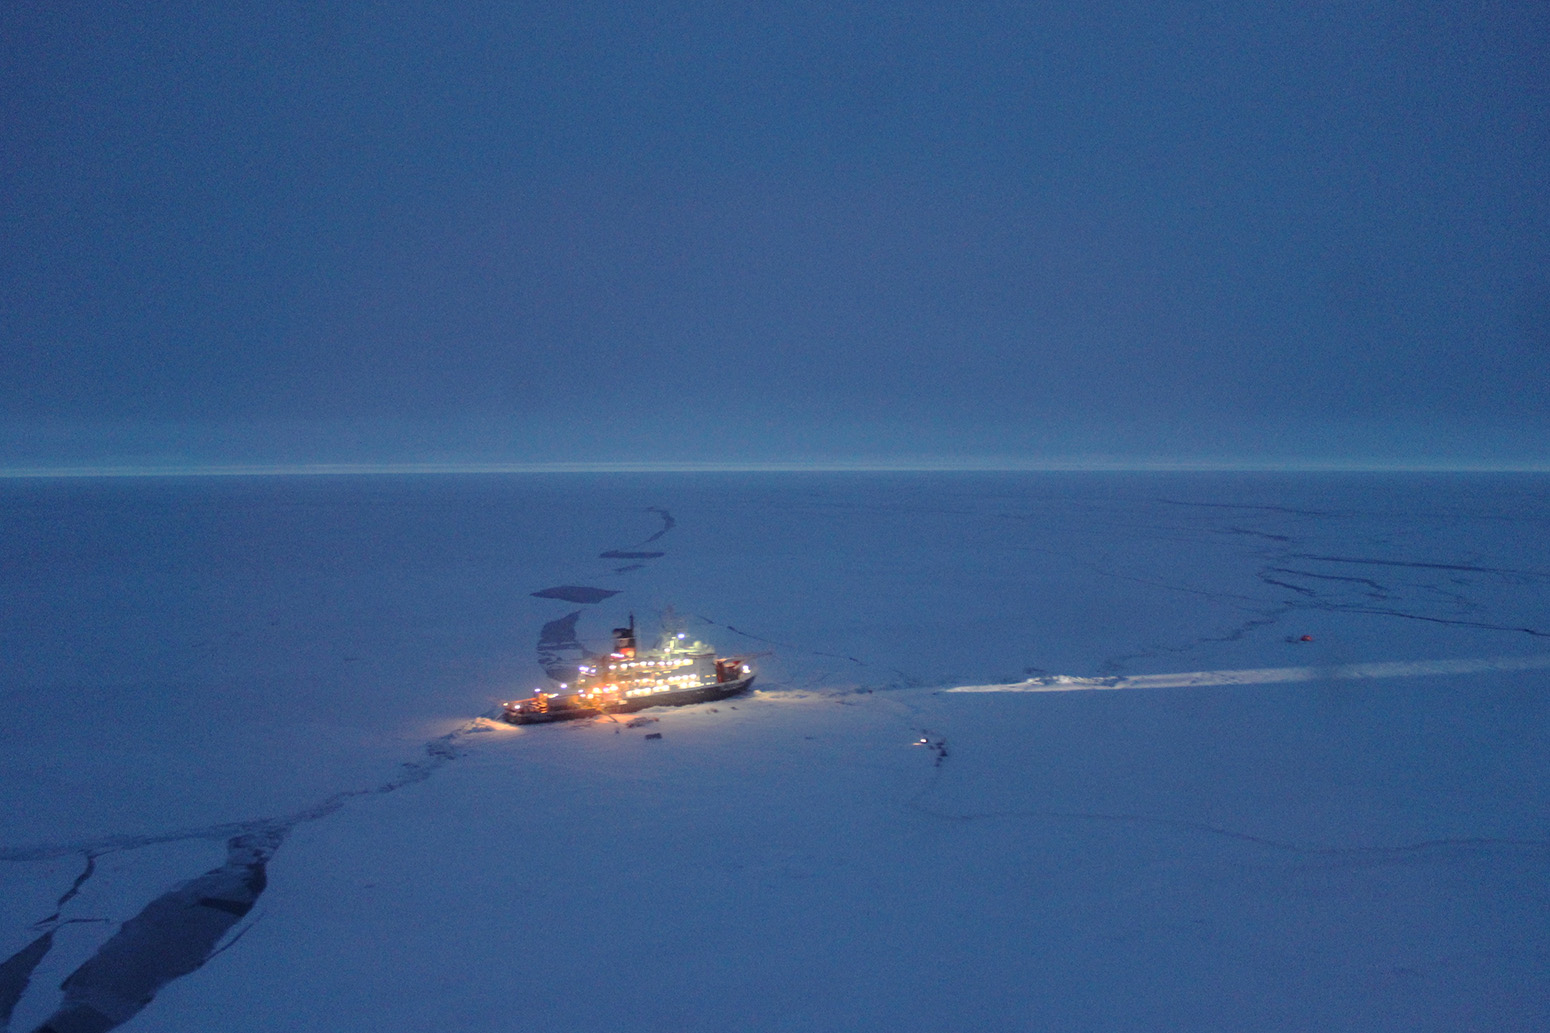 The Polarstern moored to an ice floe in the Central Arctic Ocean, as viewed from the window of an Mi-8 helicopter.